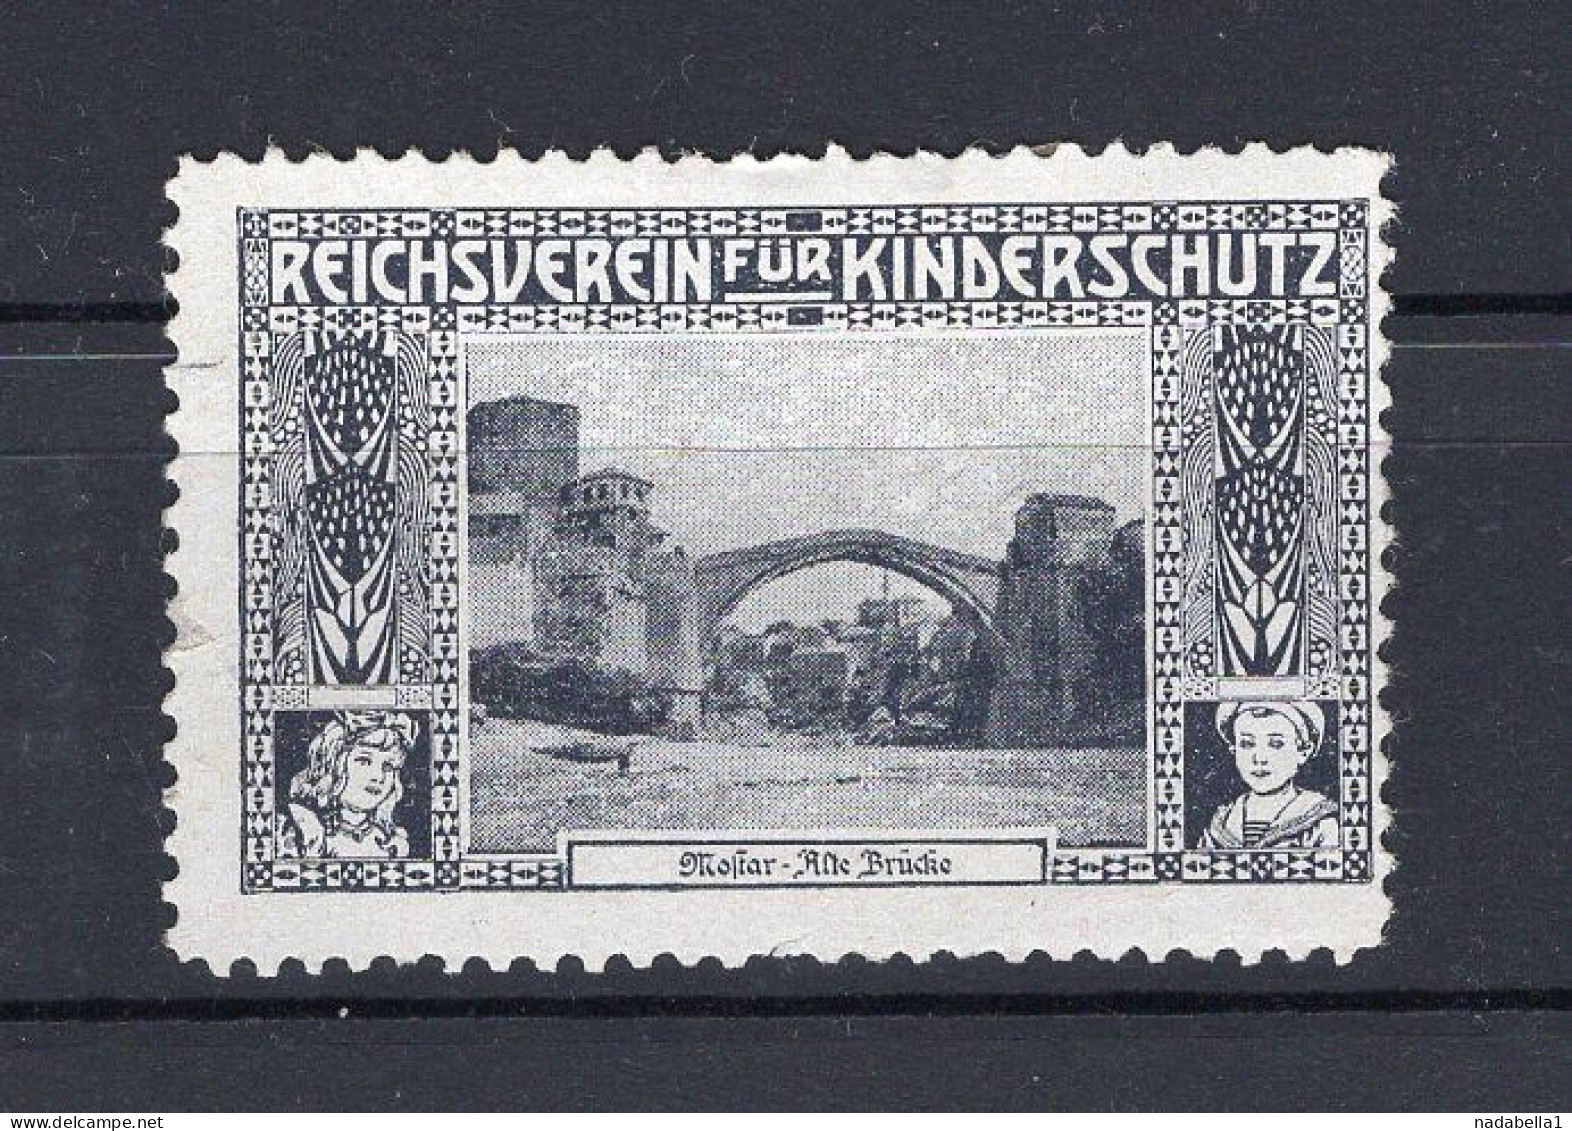 1900? AUSTRIA,HUNGARY EMPIRE,BOSNIA,REICH ASSOCIATION FOR CHILD PROTECTION ADDITIONAL STAMP,MOSTAR OLD BRIDGE - Neufs